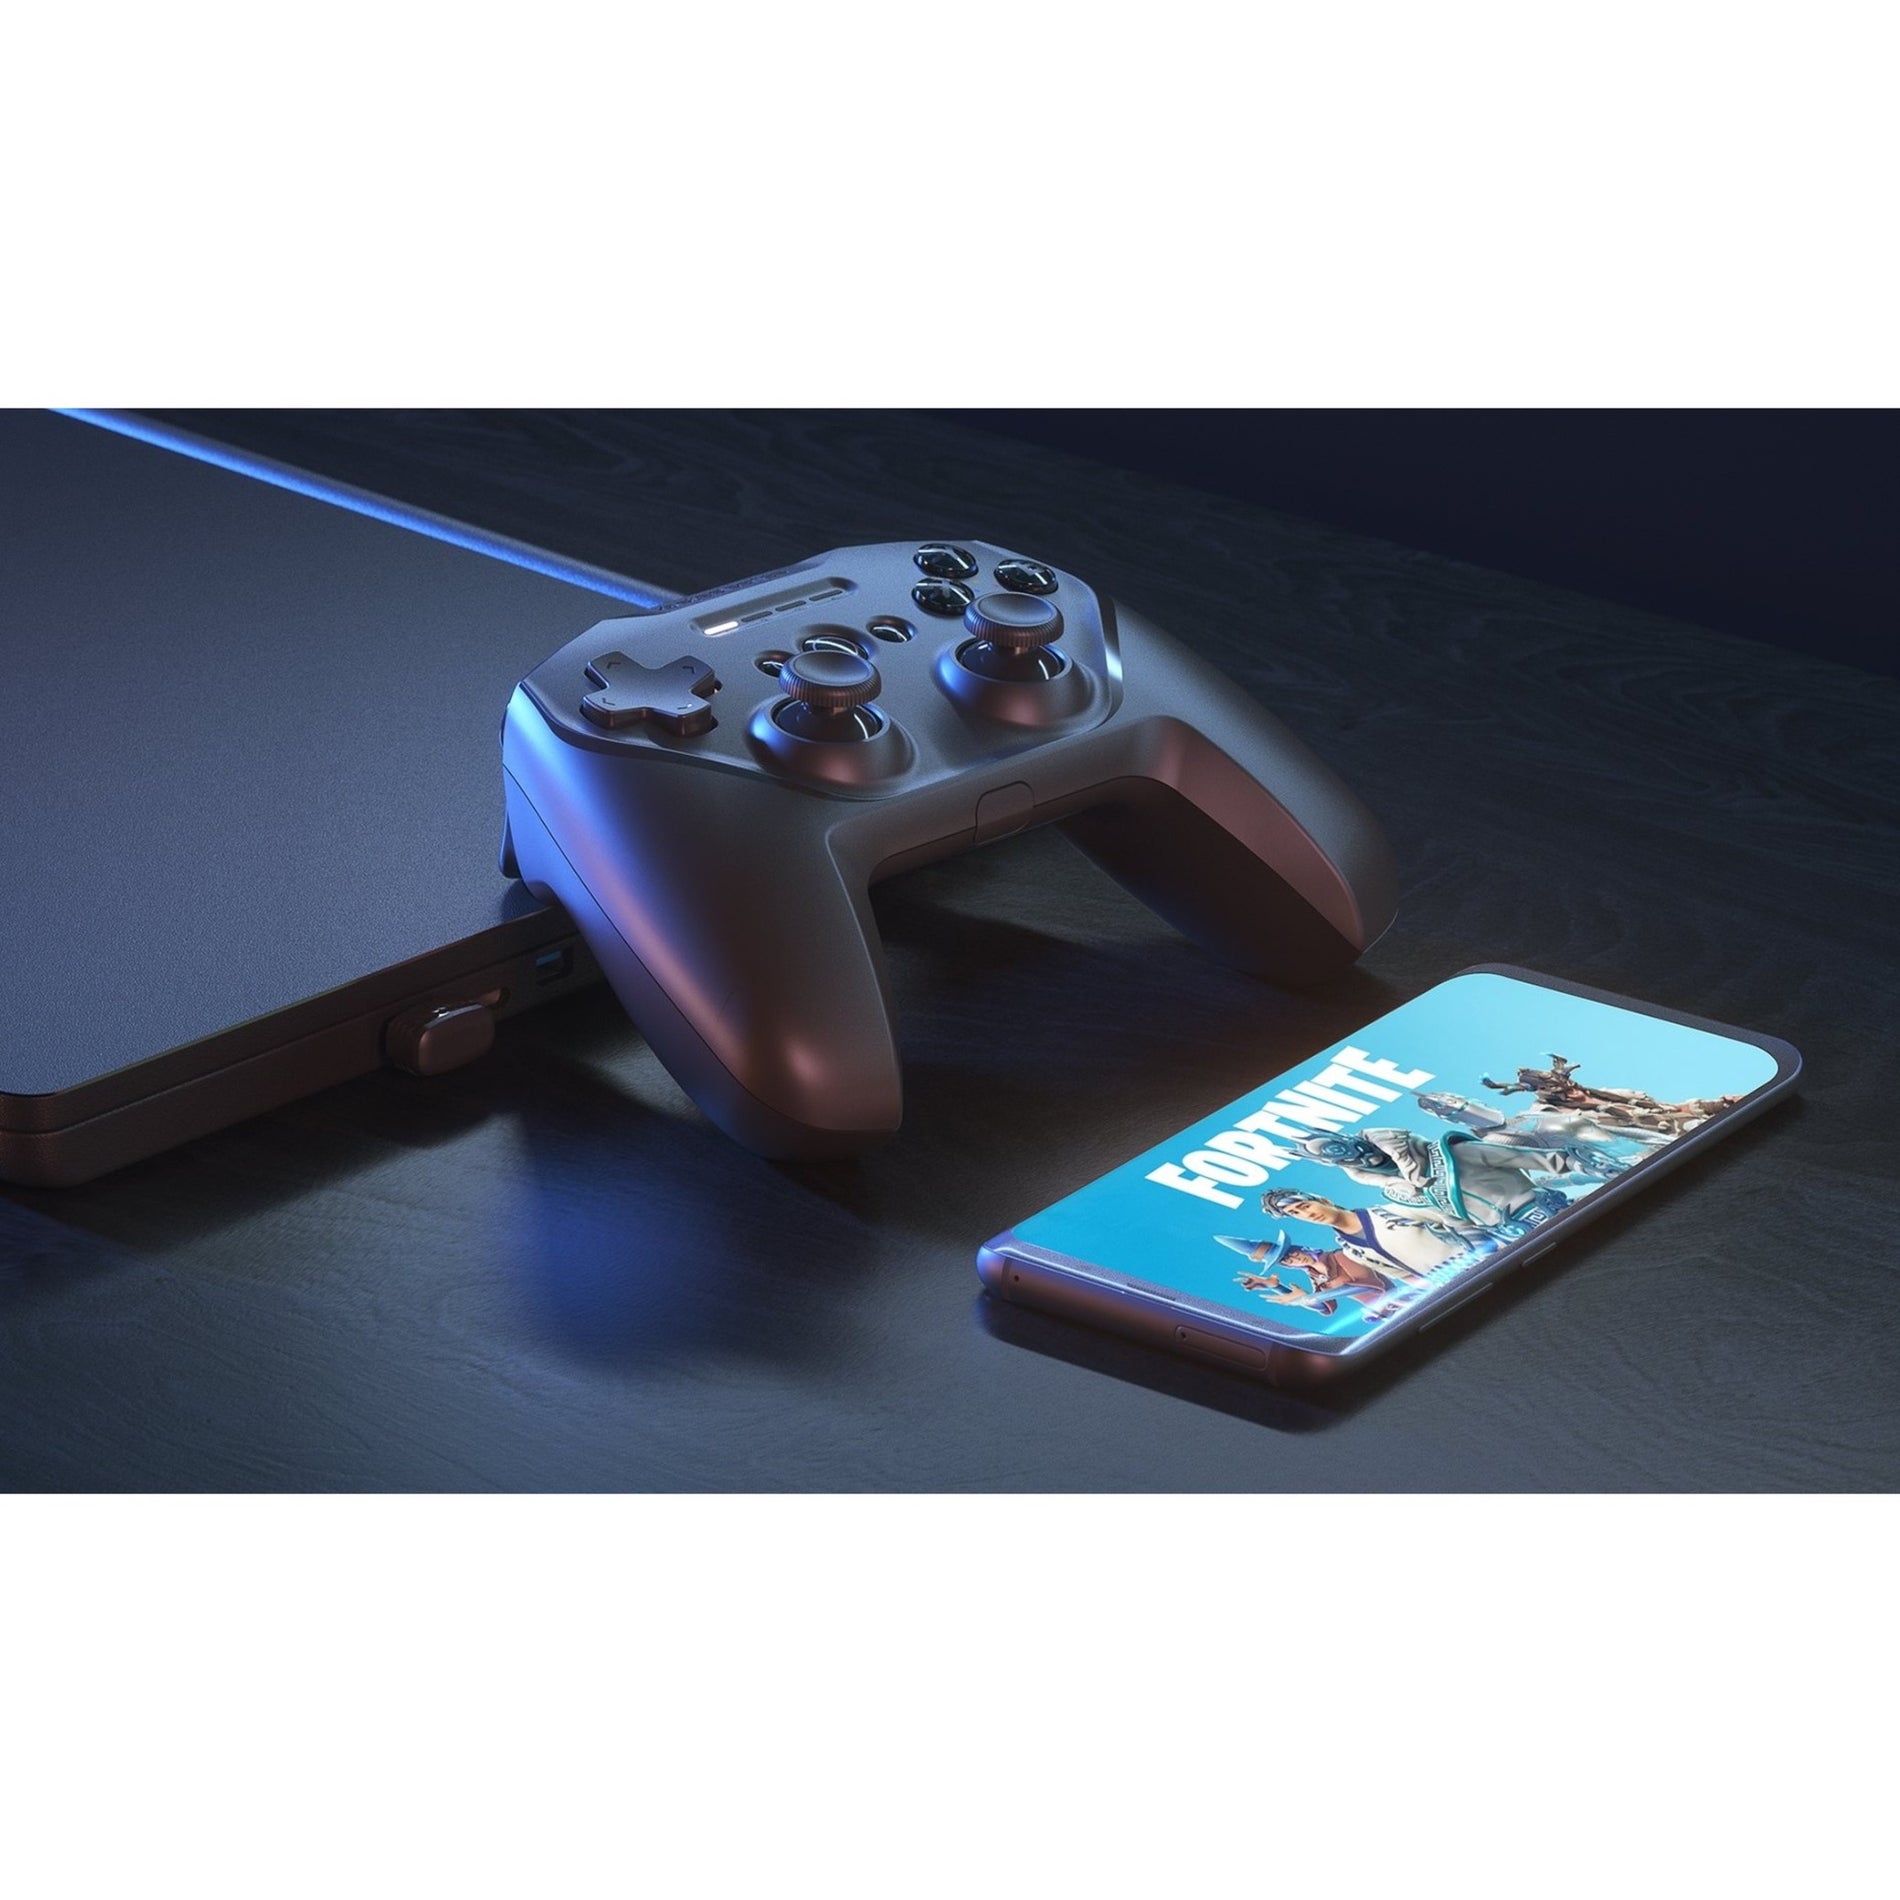 SteelSeries Stratus Duo Android Wireless Controller - Gaming Pad for Windows, Chromebook, Android, and VR [Discontinued]